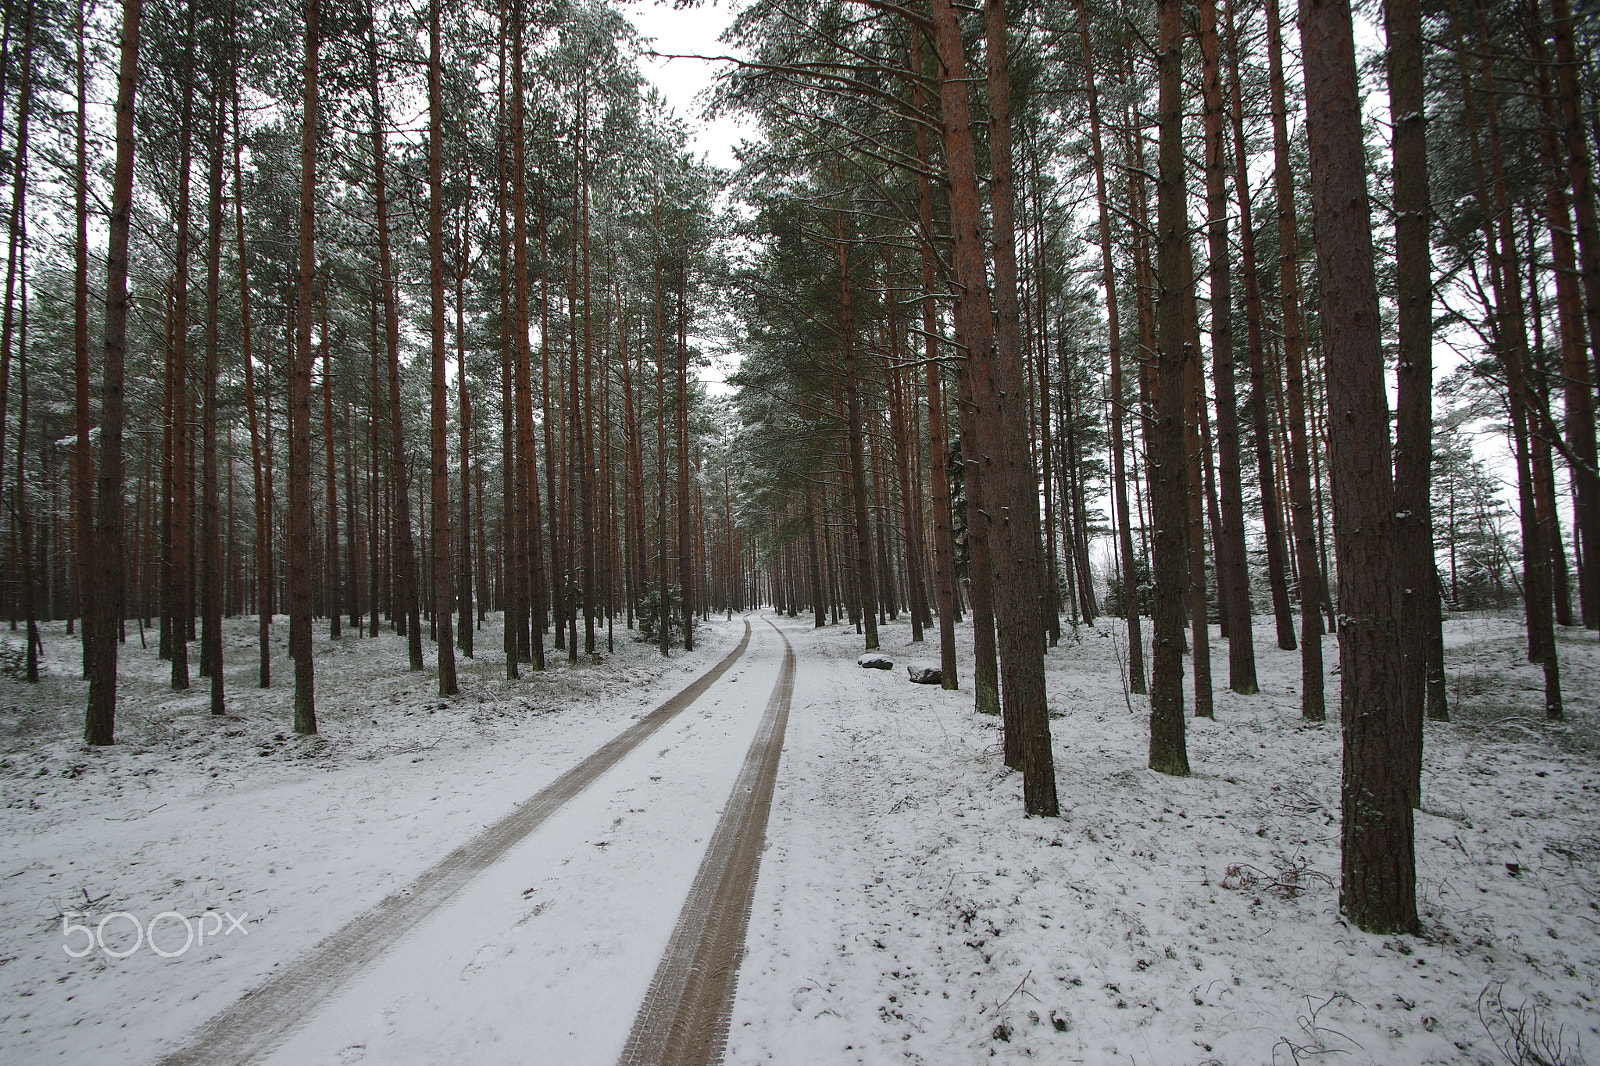 Pentax K-3 sample photo. Sunday walk in a snowy forest photography